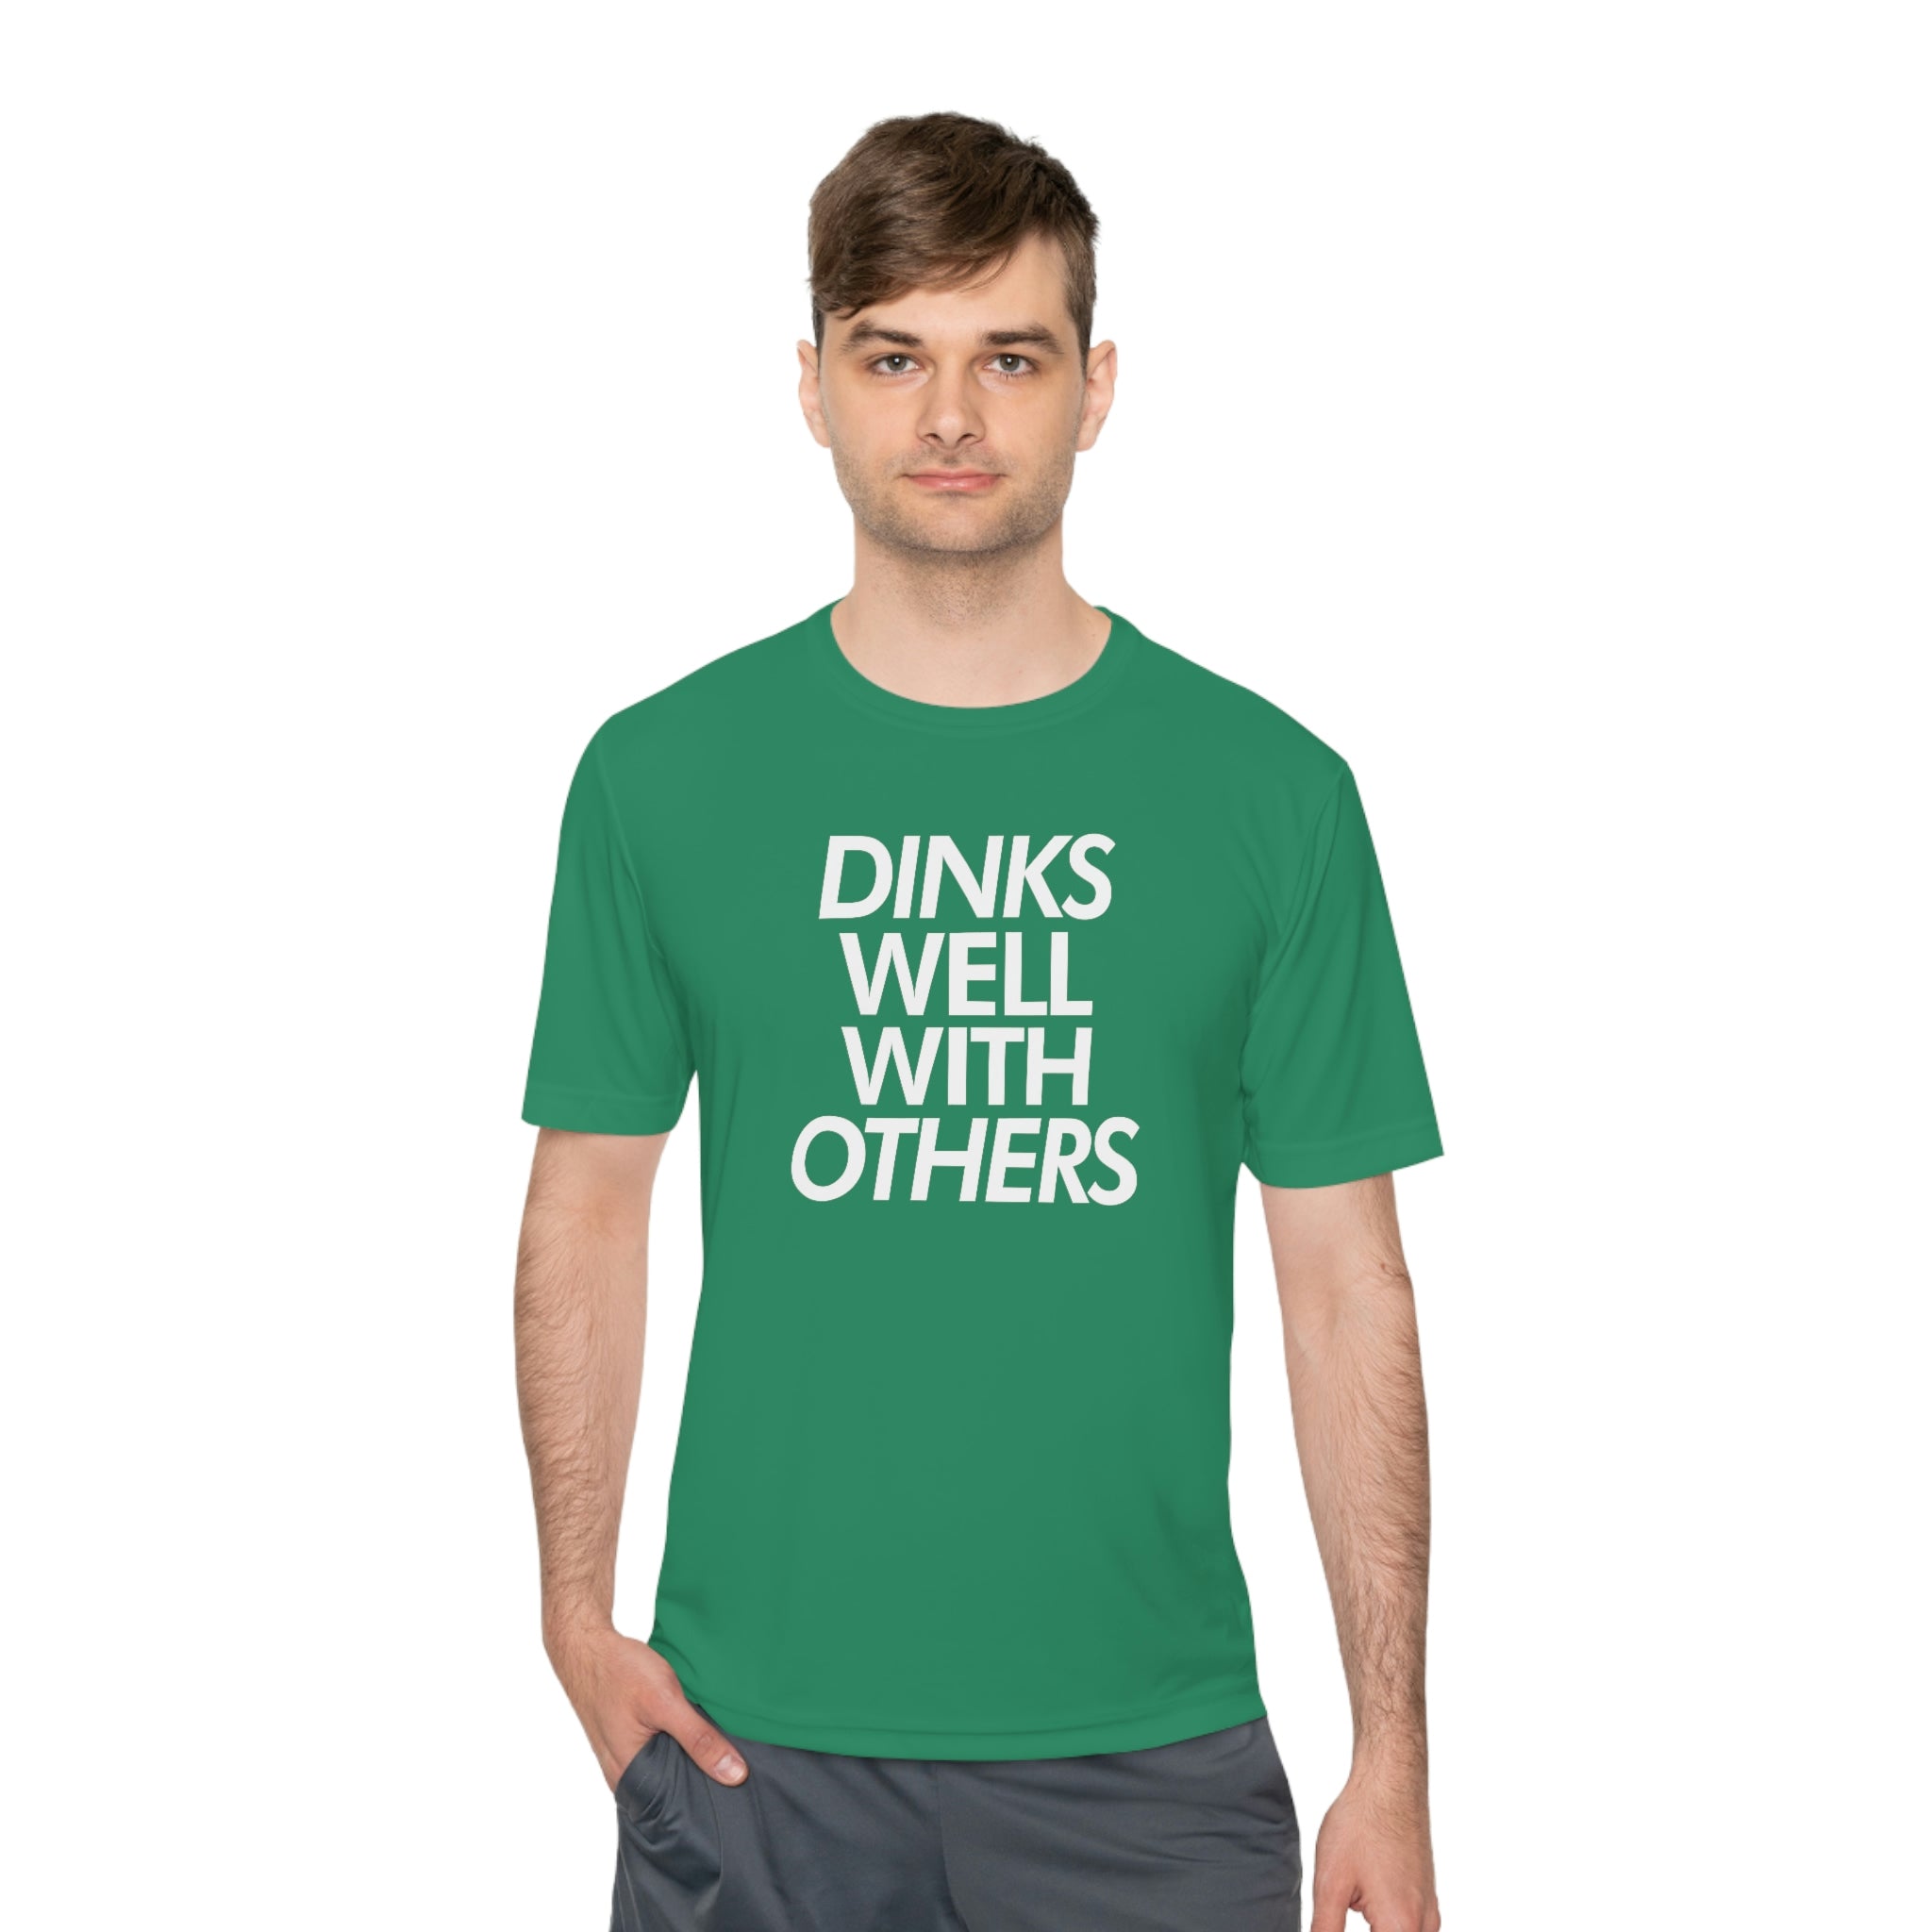 man wearing kelly green dinks well with others athletic performance pickleball shirt apparel front view